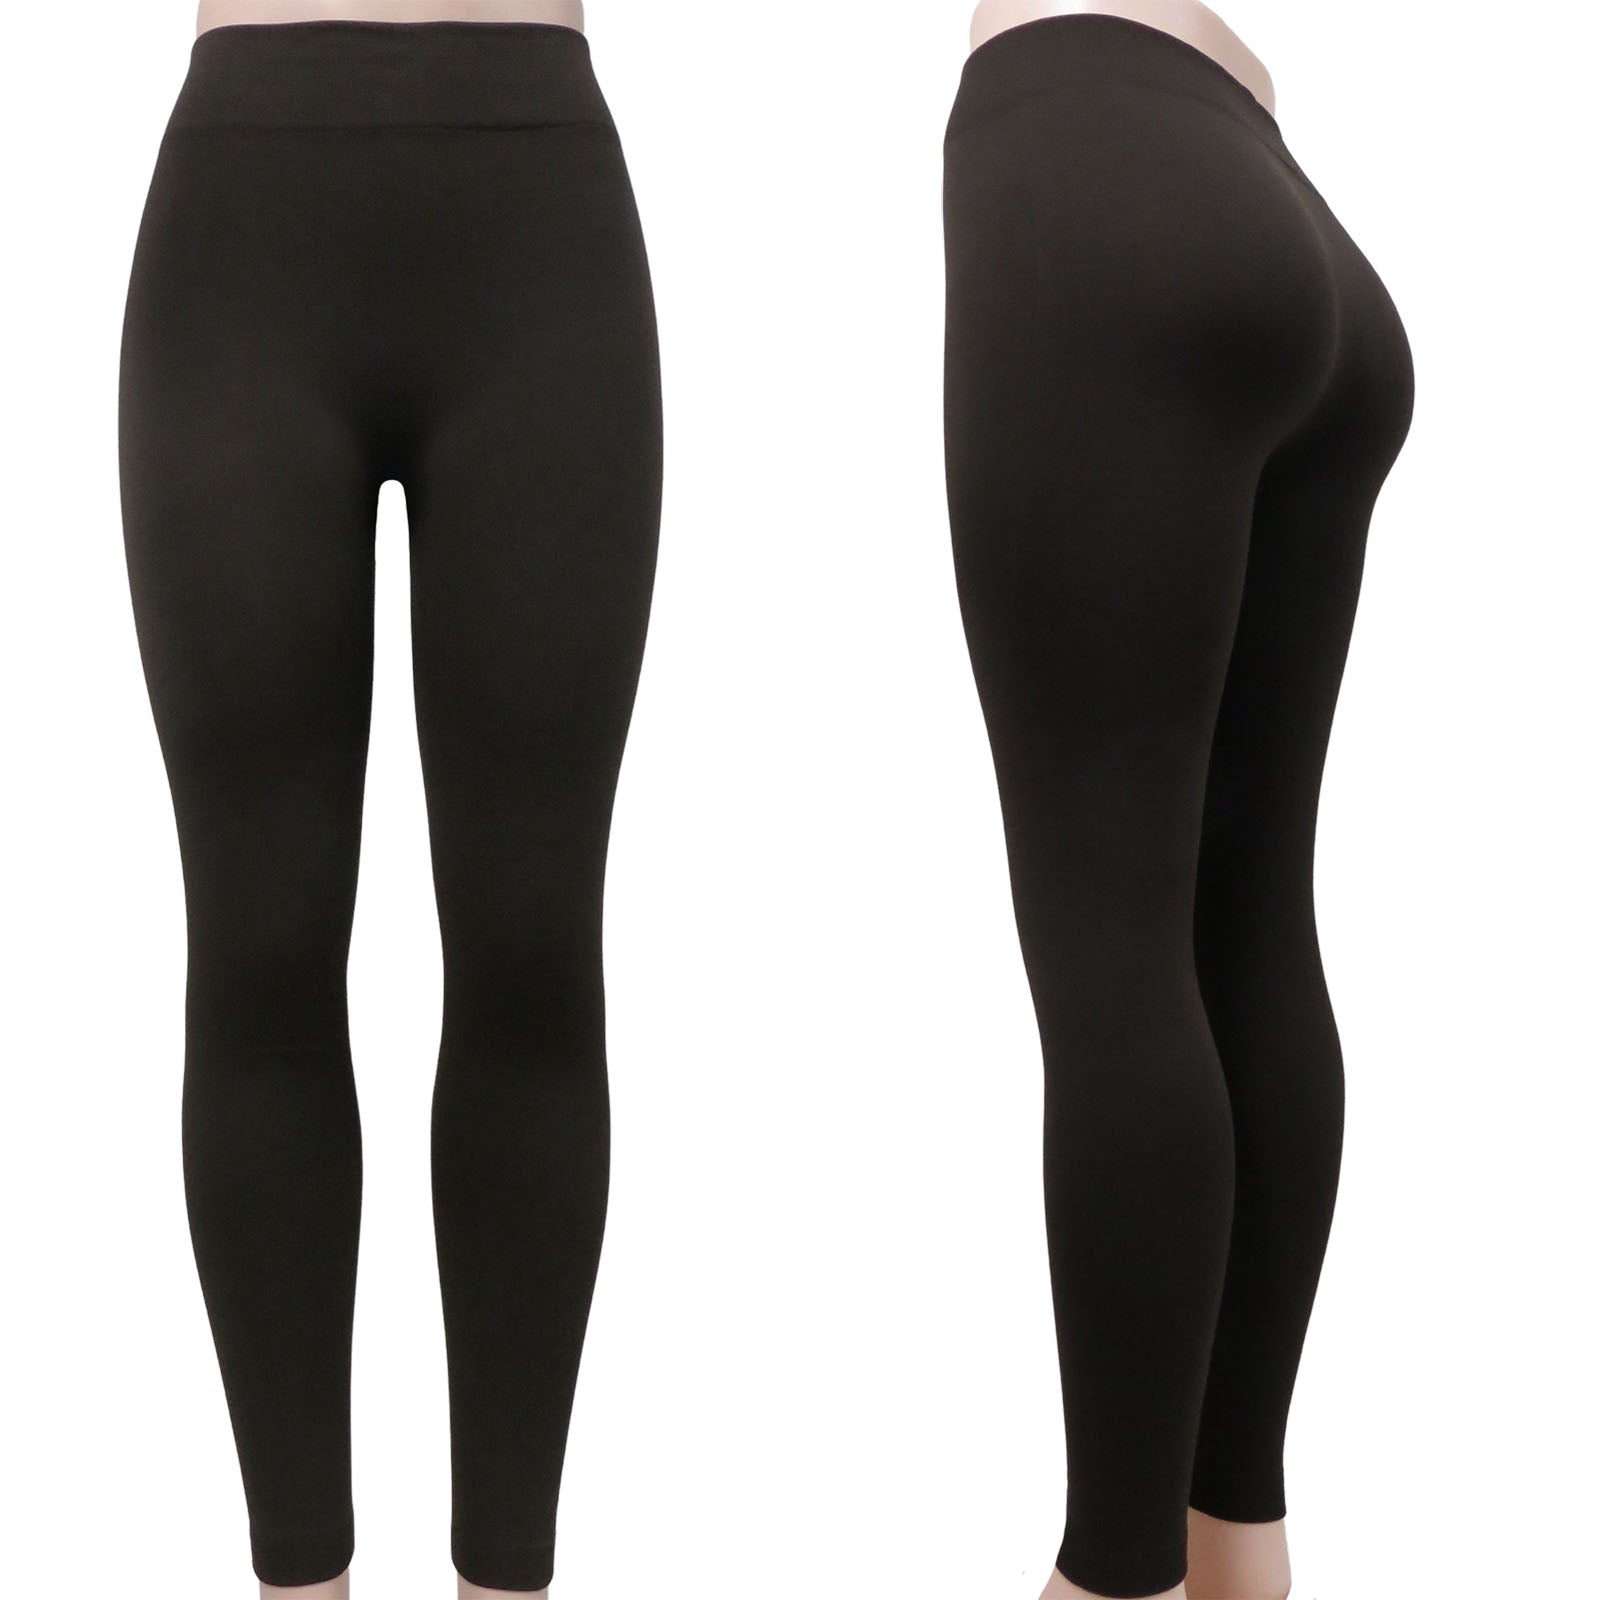 ITEM NUMBER: AP720-THERESA-ASST (12 PIECE PACK WAS $3.00 - CLEARANCE JUST  $2.00 / PIECE) FLEECE LEGGINGS ASSORTED COLOR PACK